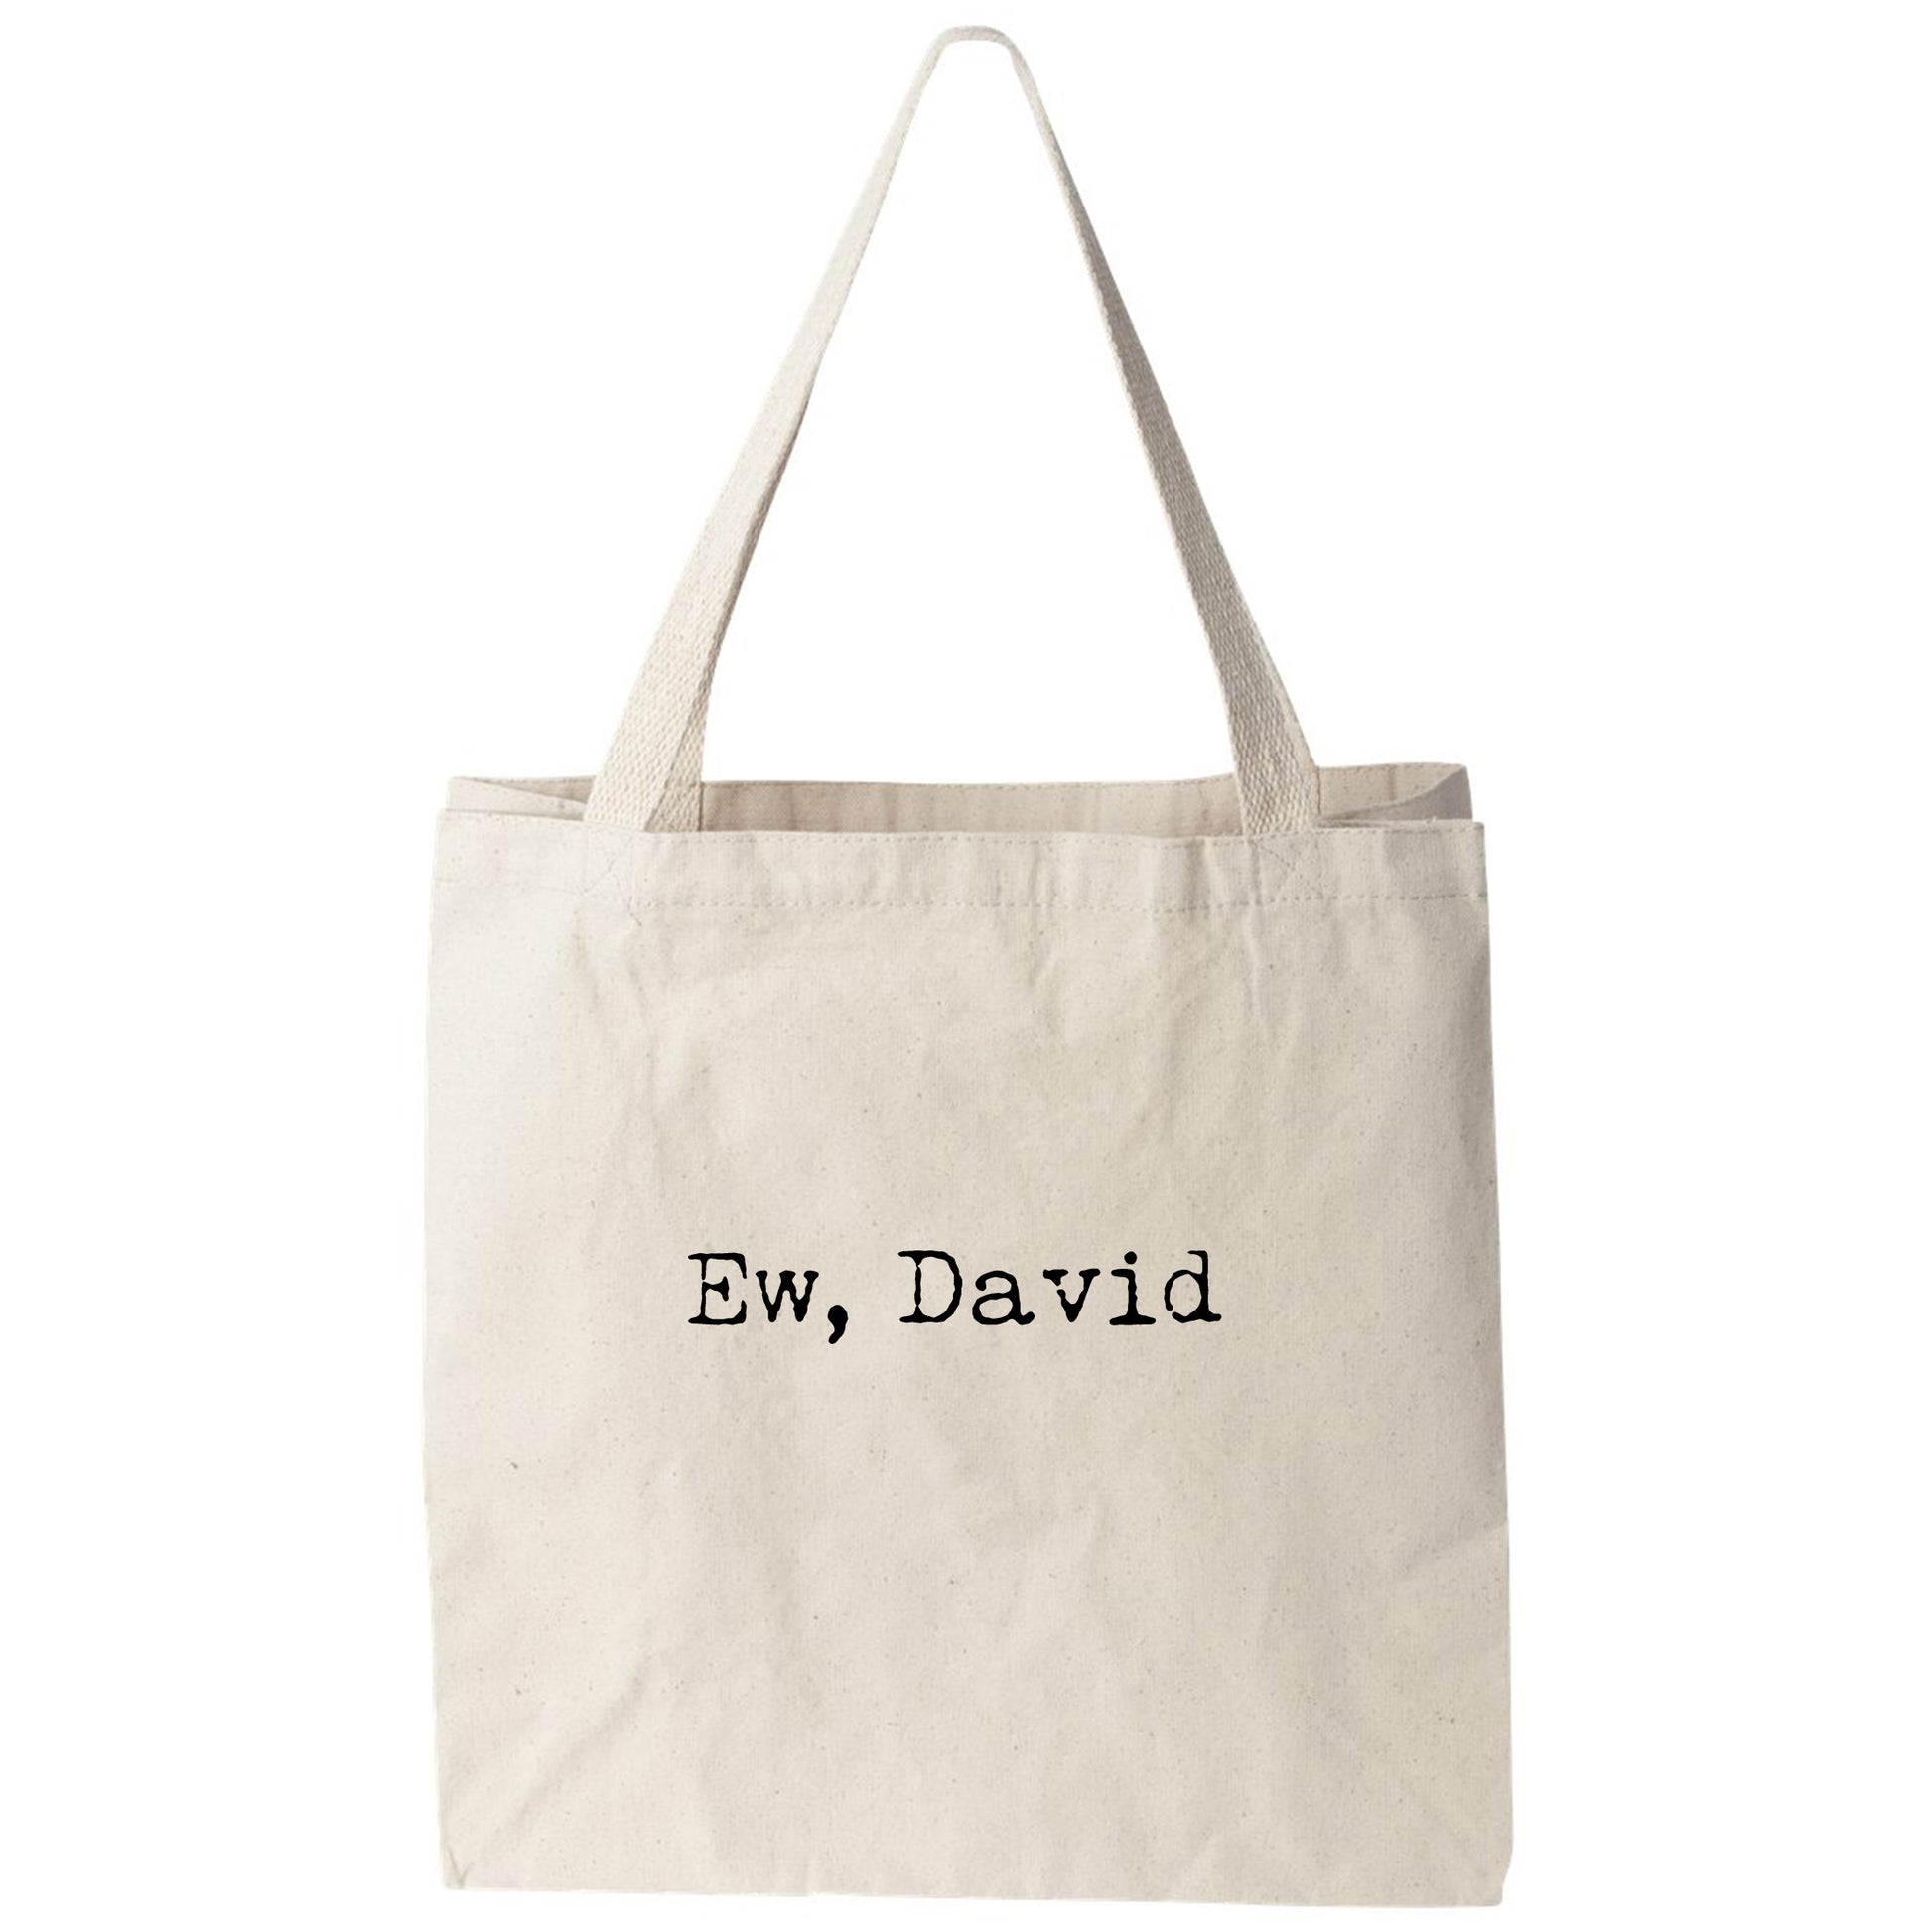 a tote bag with the words ew, david printed on it